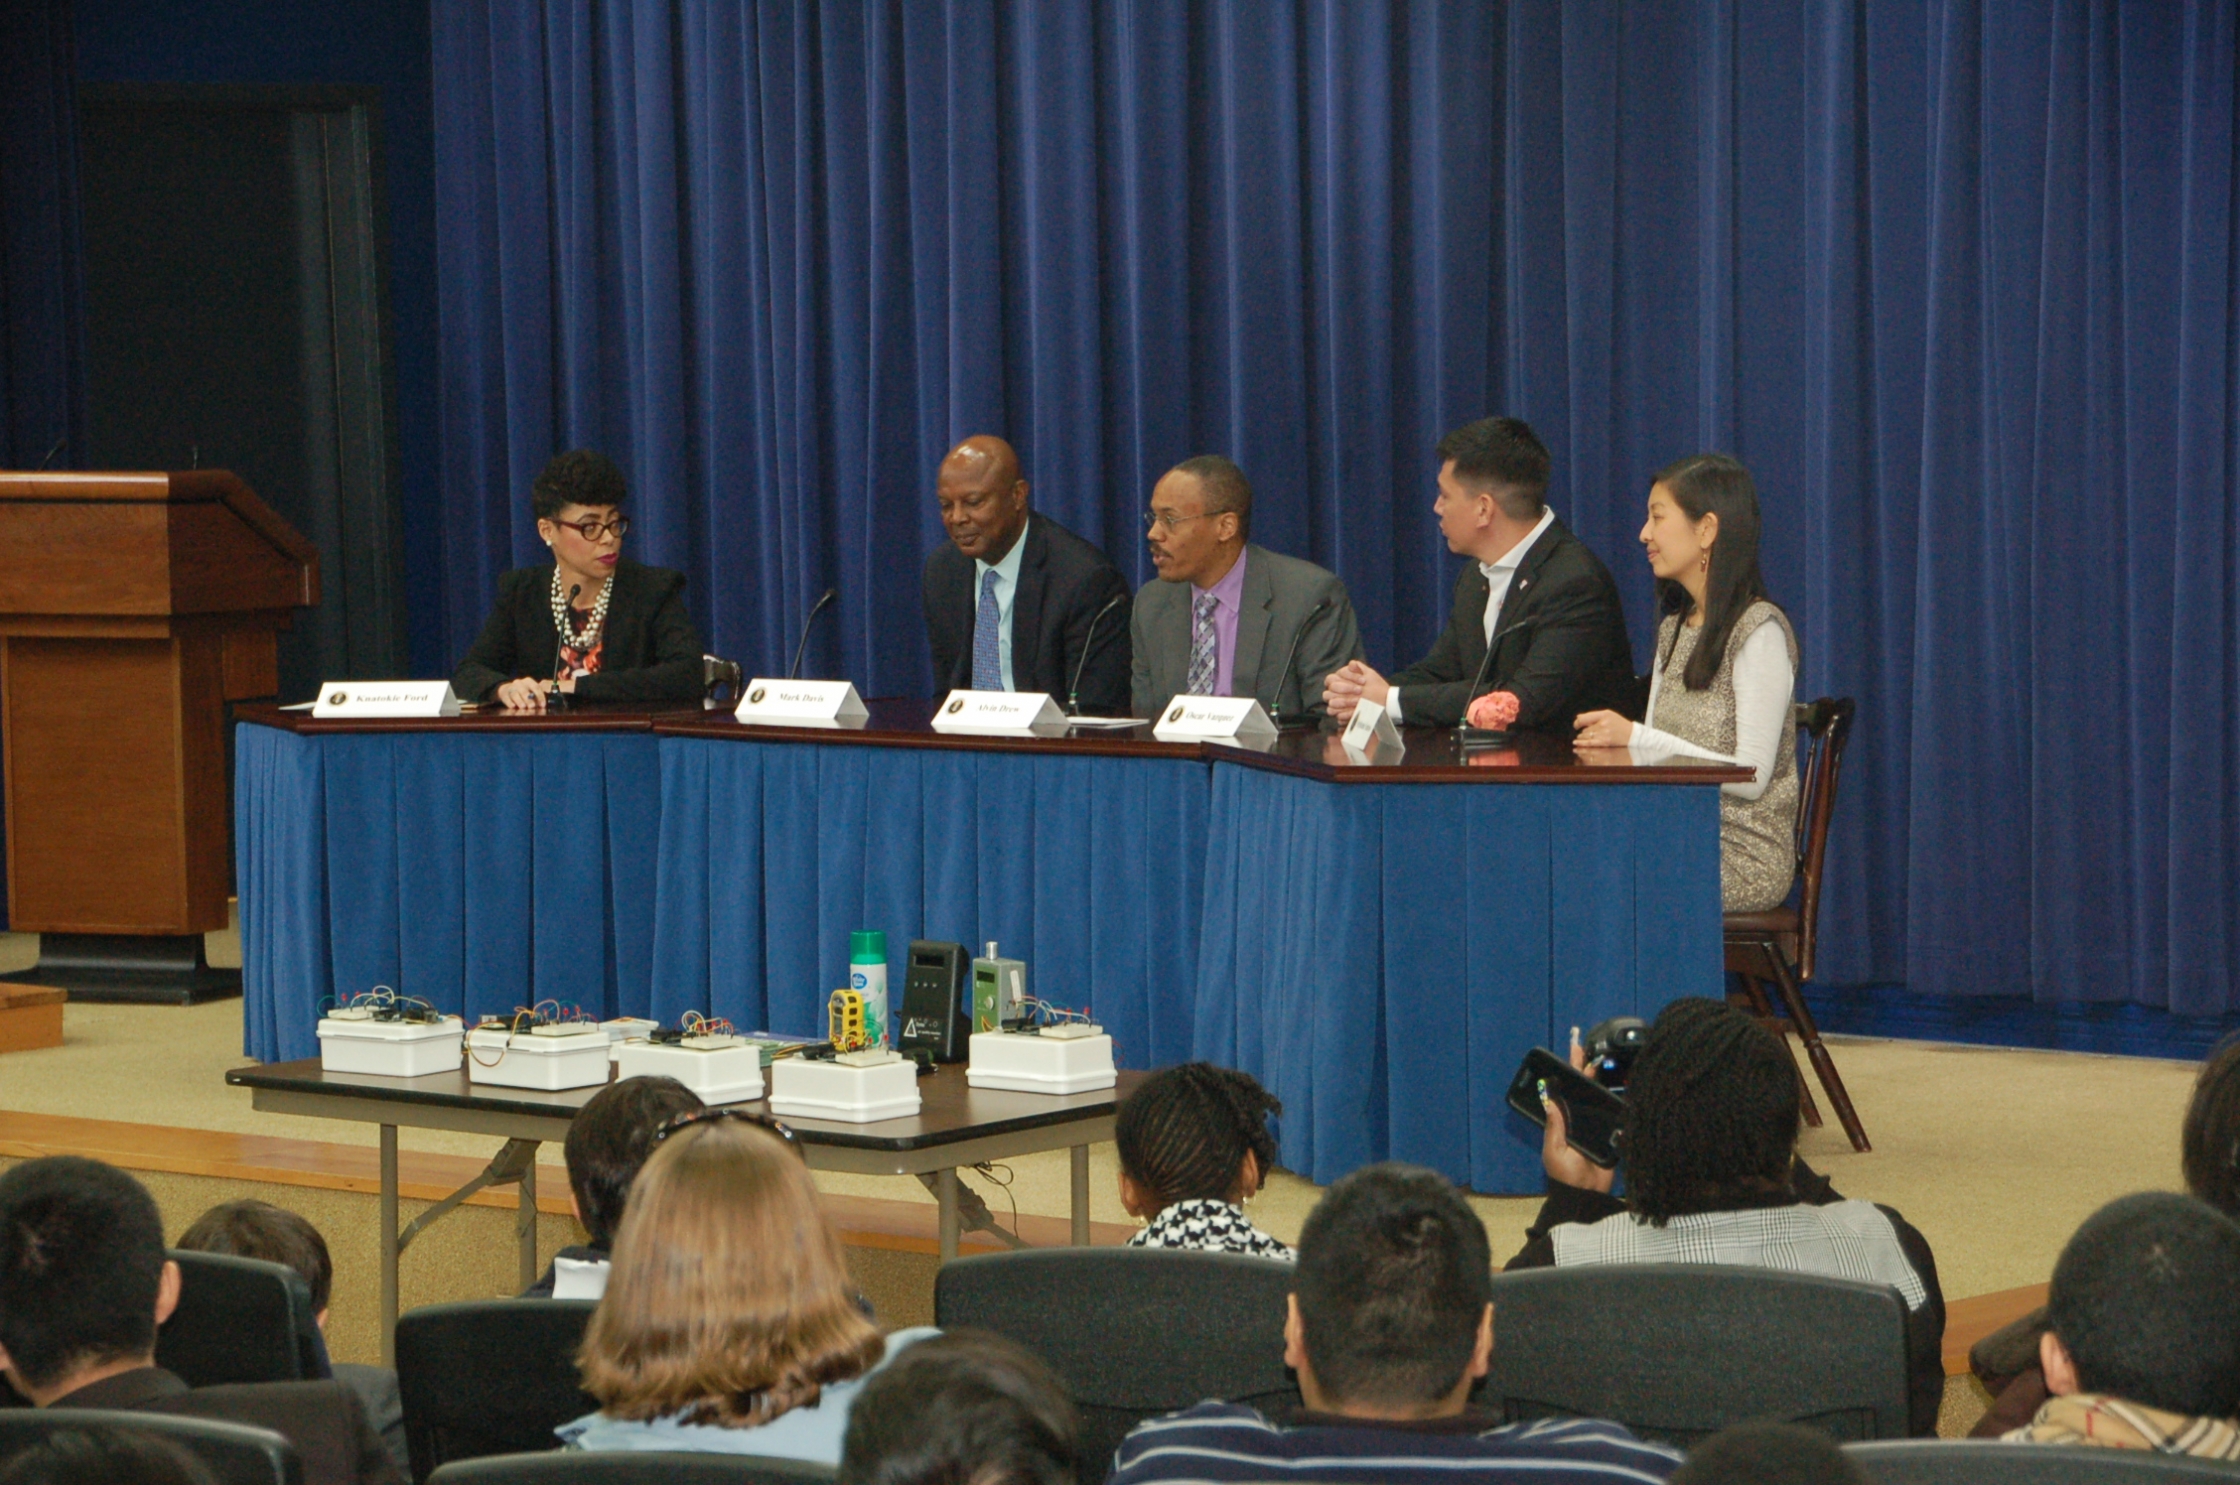 Panel participants discuss the importance of science, technology, engineering, and math (STEM) education. 